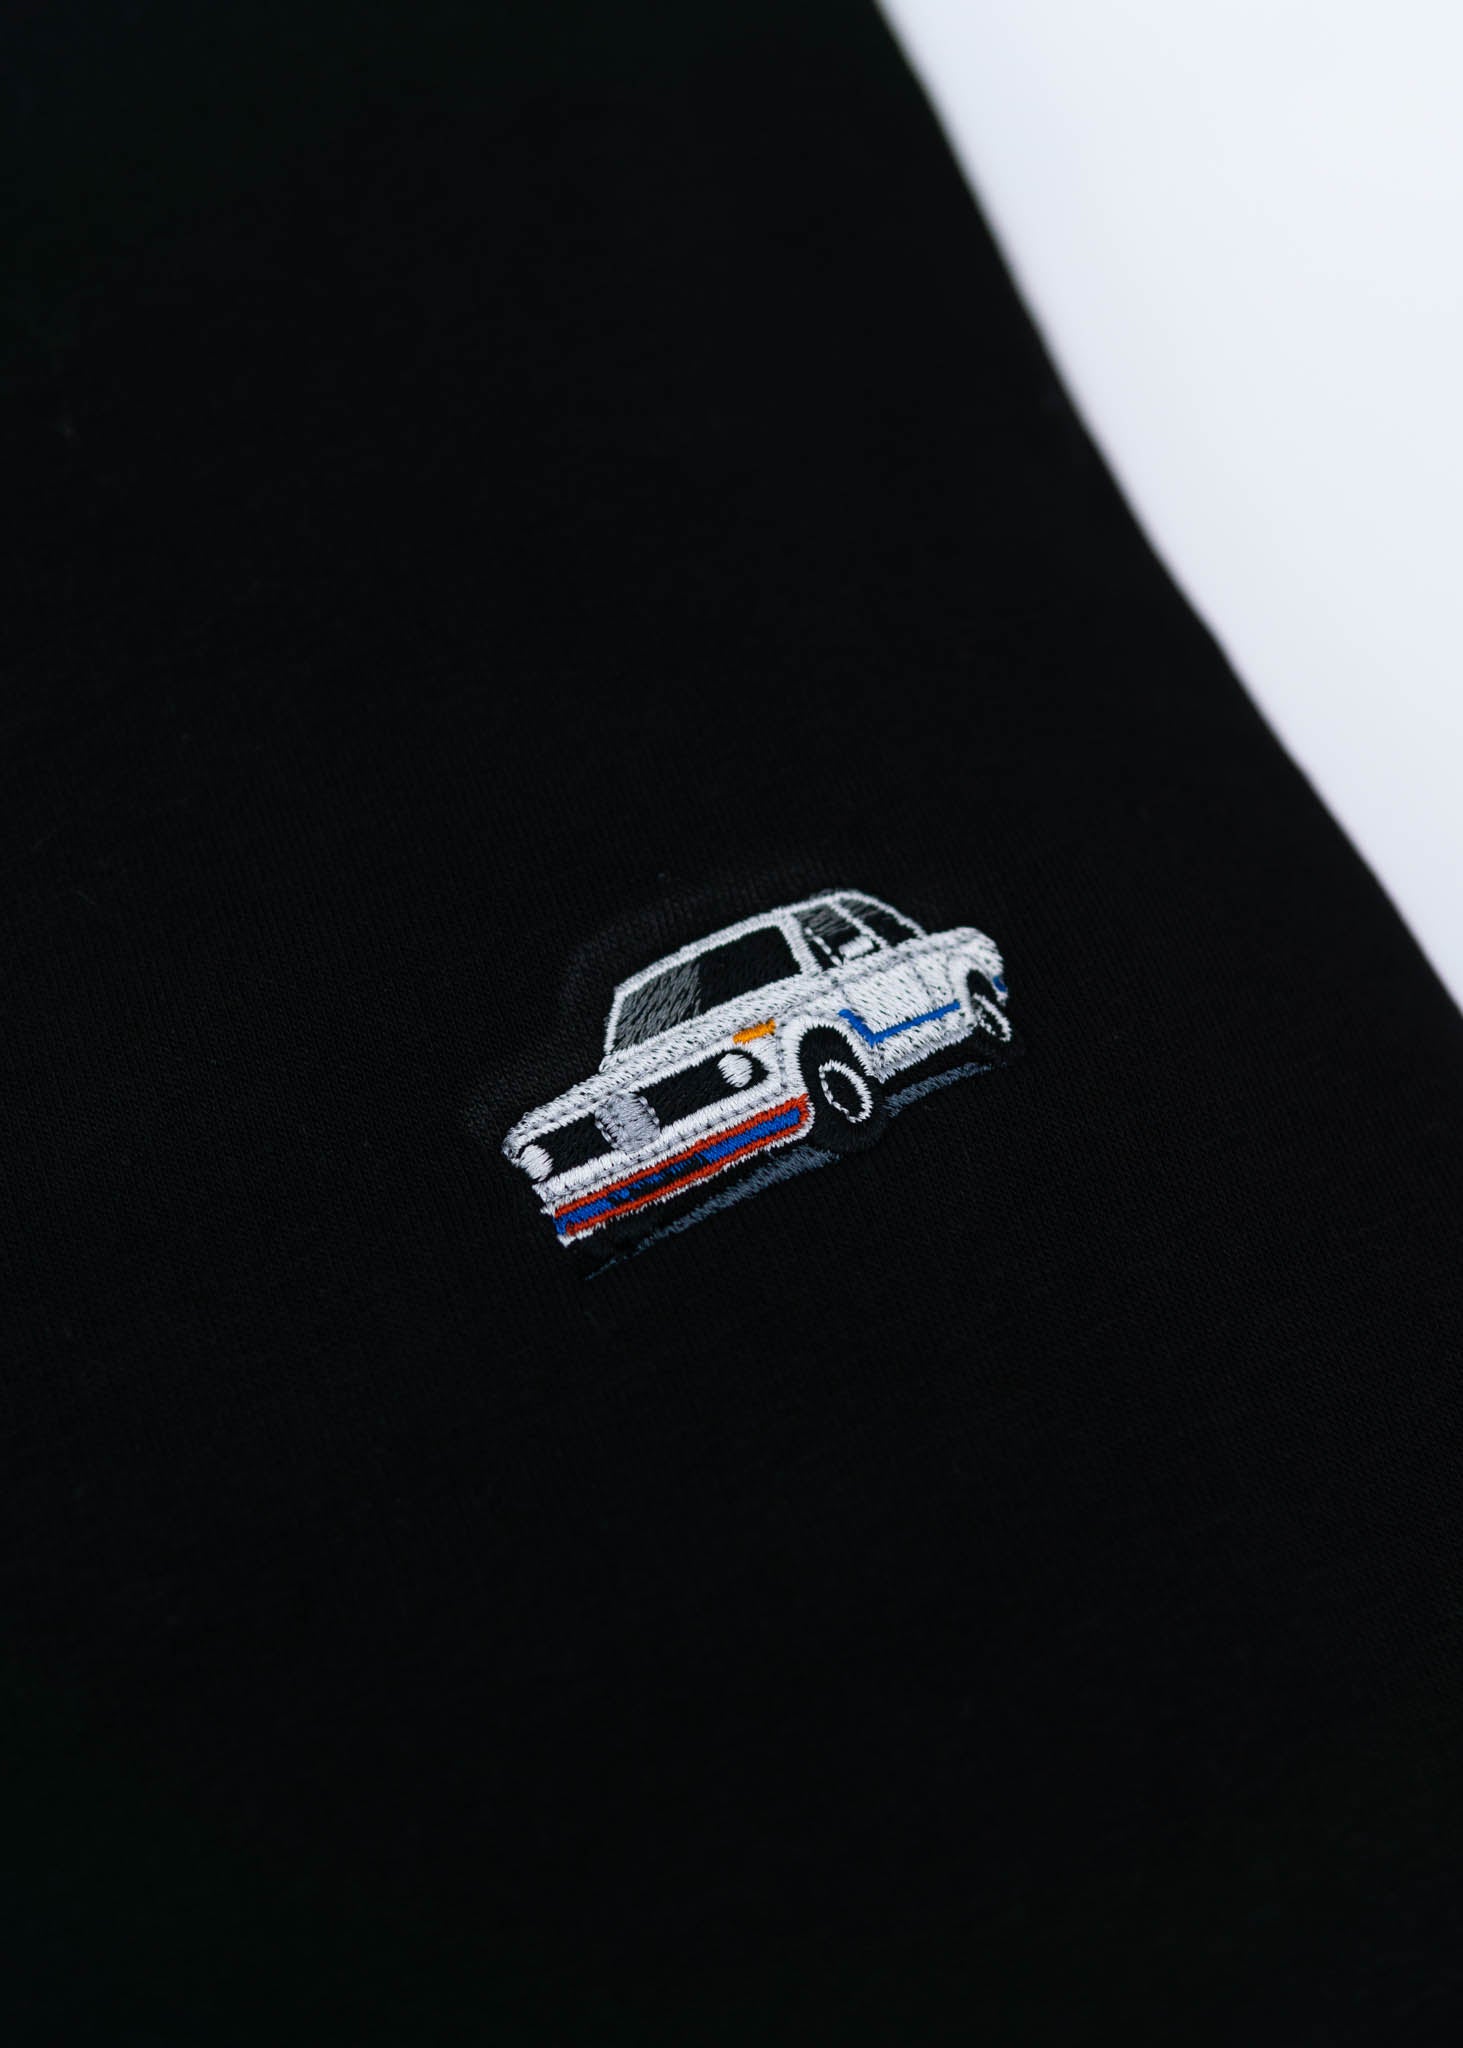 A black BMW crewneck sweater for men. Photo is a close up of the sweater with an embroidered BMW 2002 Turbo. Fabric is composed of high quality 80% cotton, and 20% polyester and fits to size. The style is long sleeve, crew neck, and embroidery on left chest.